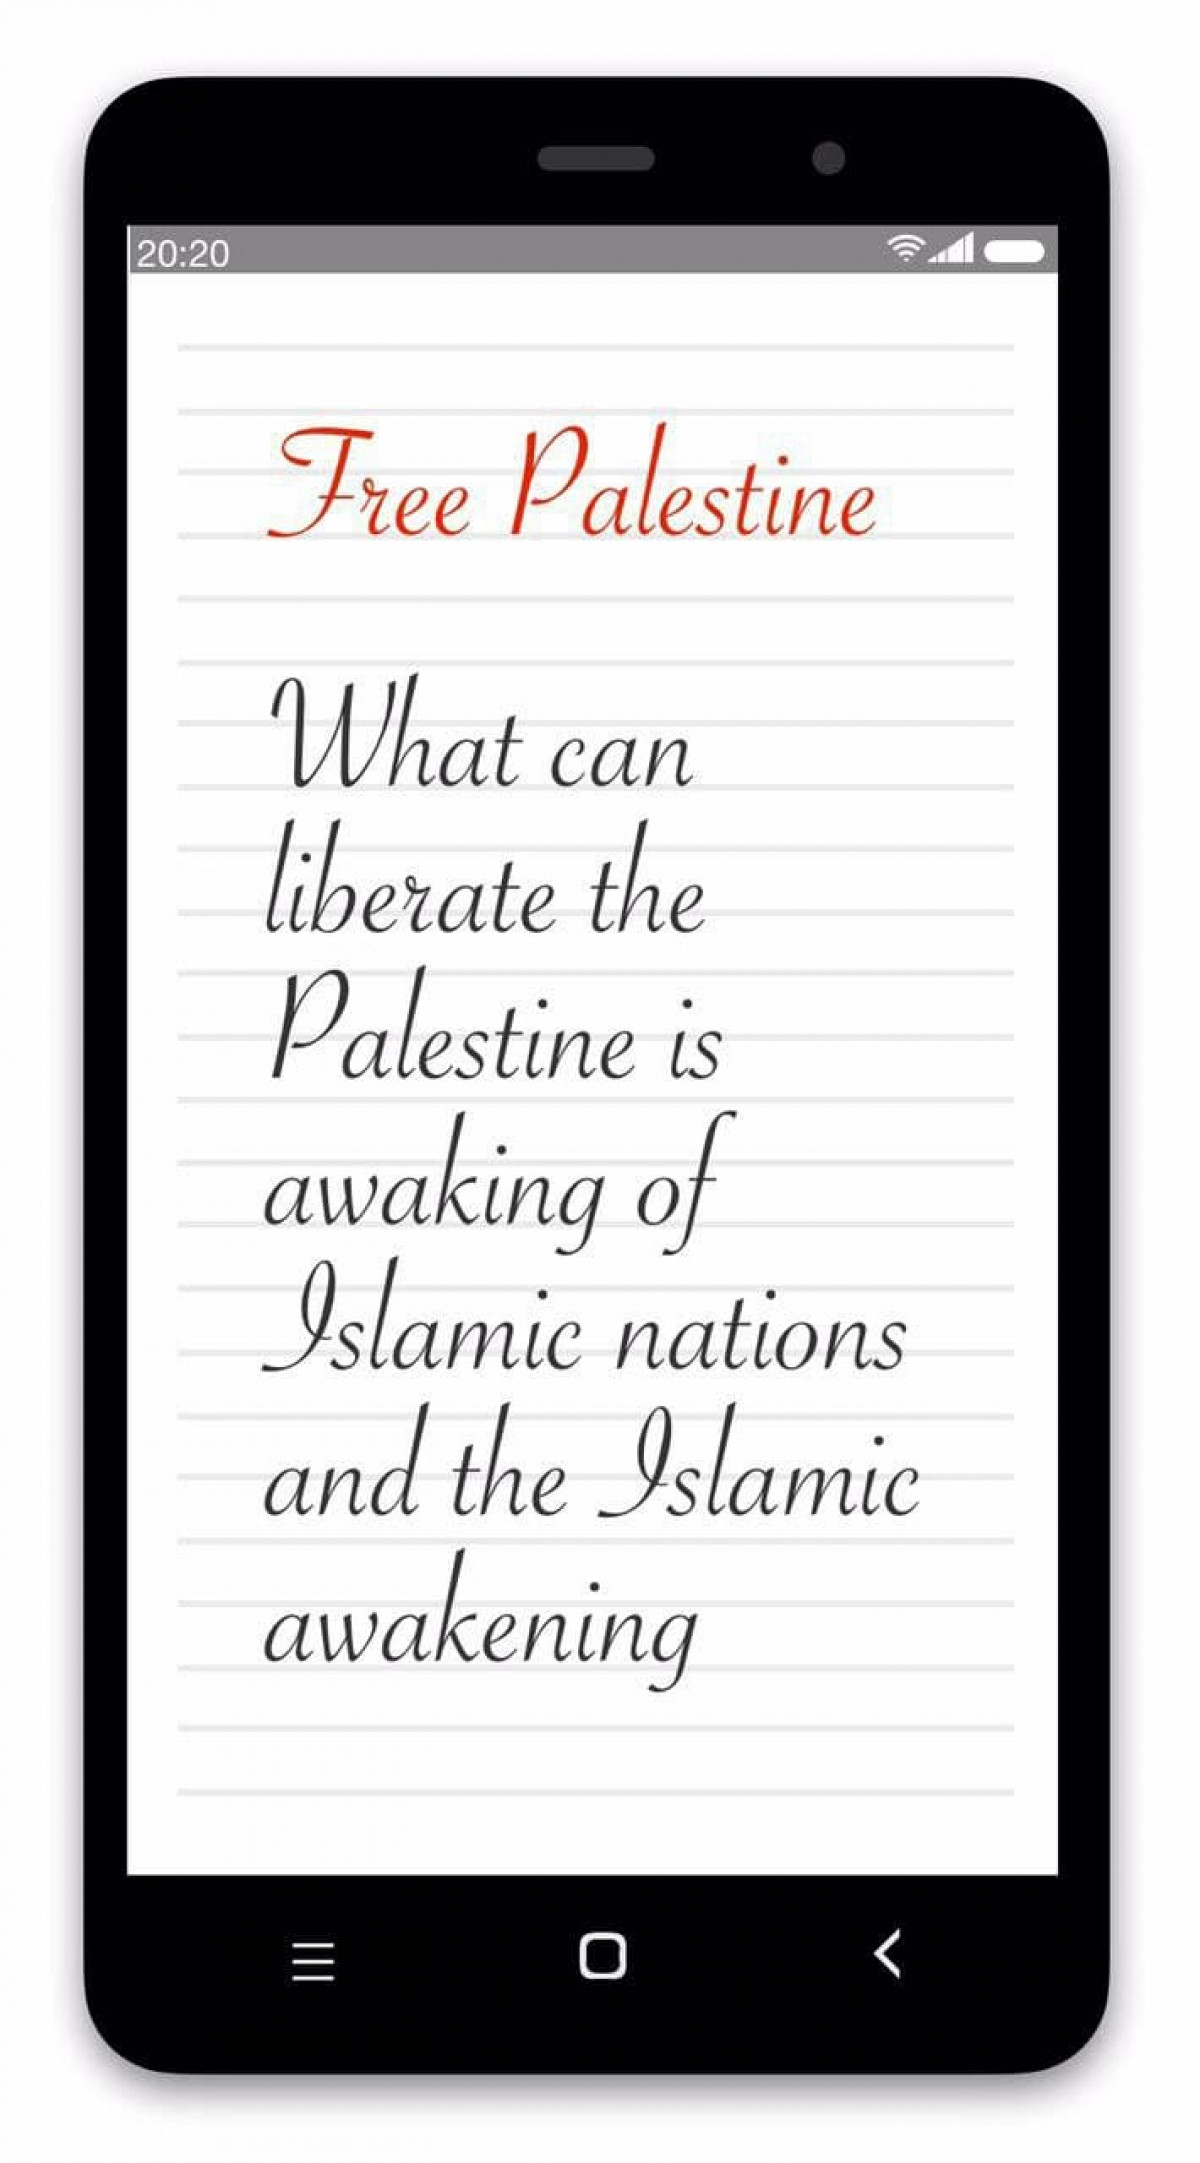 What can liberate the Palestine is awaking of Islamic nations and the Islamic awakening